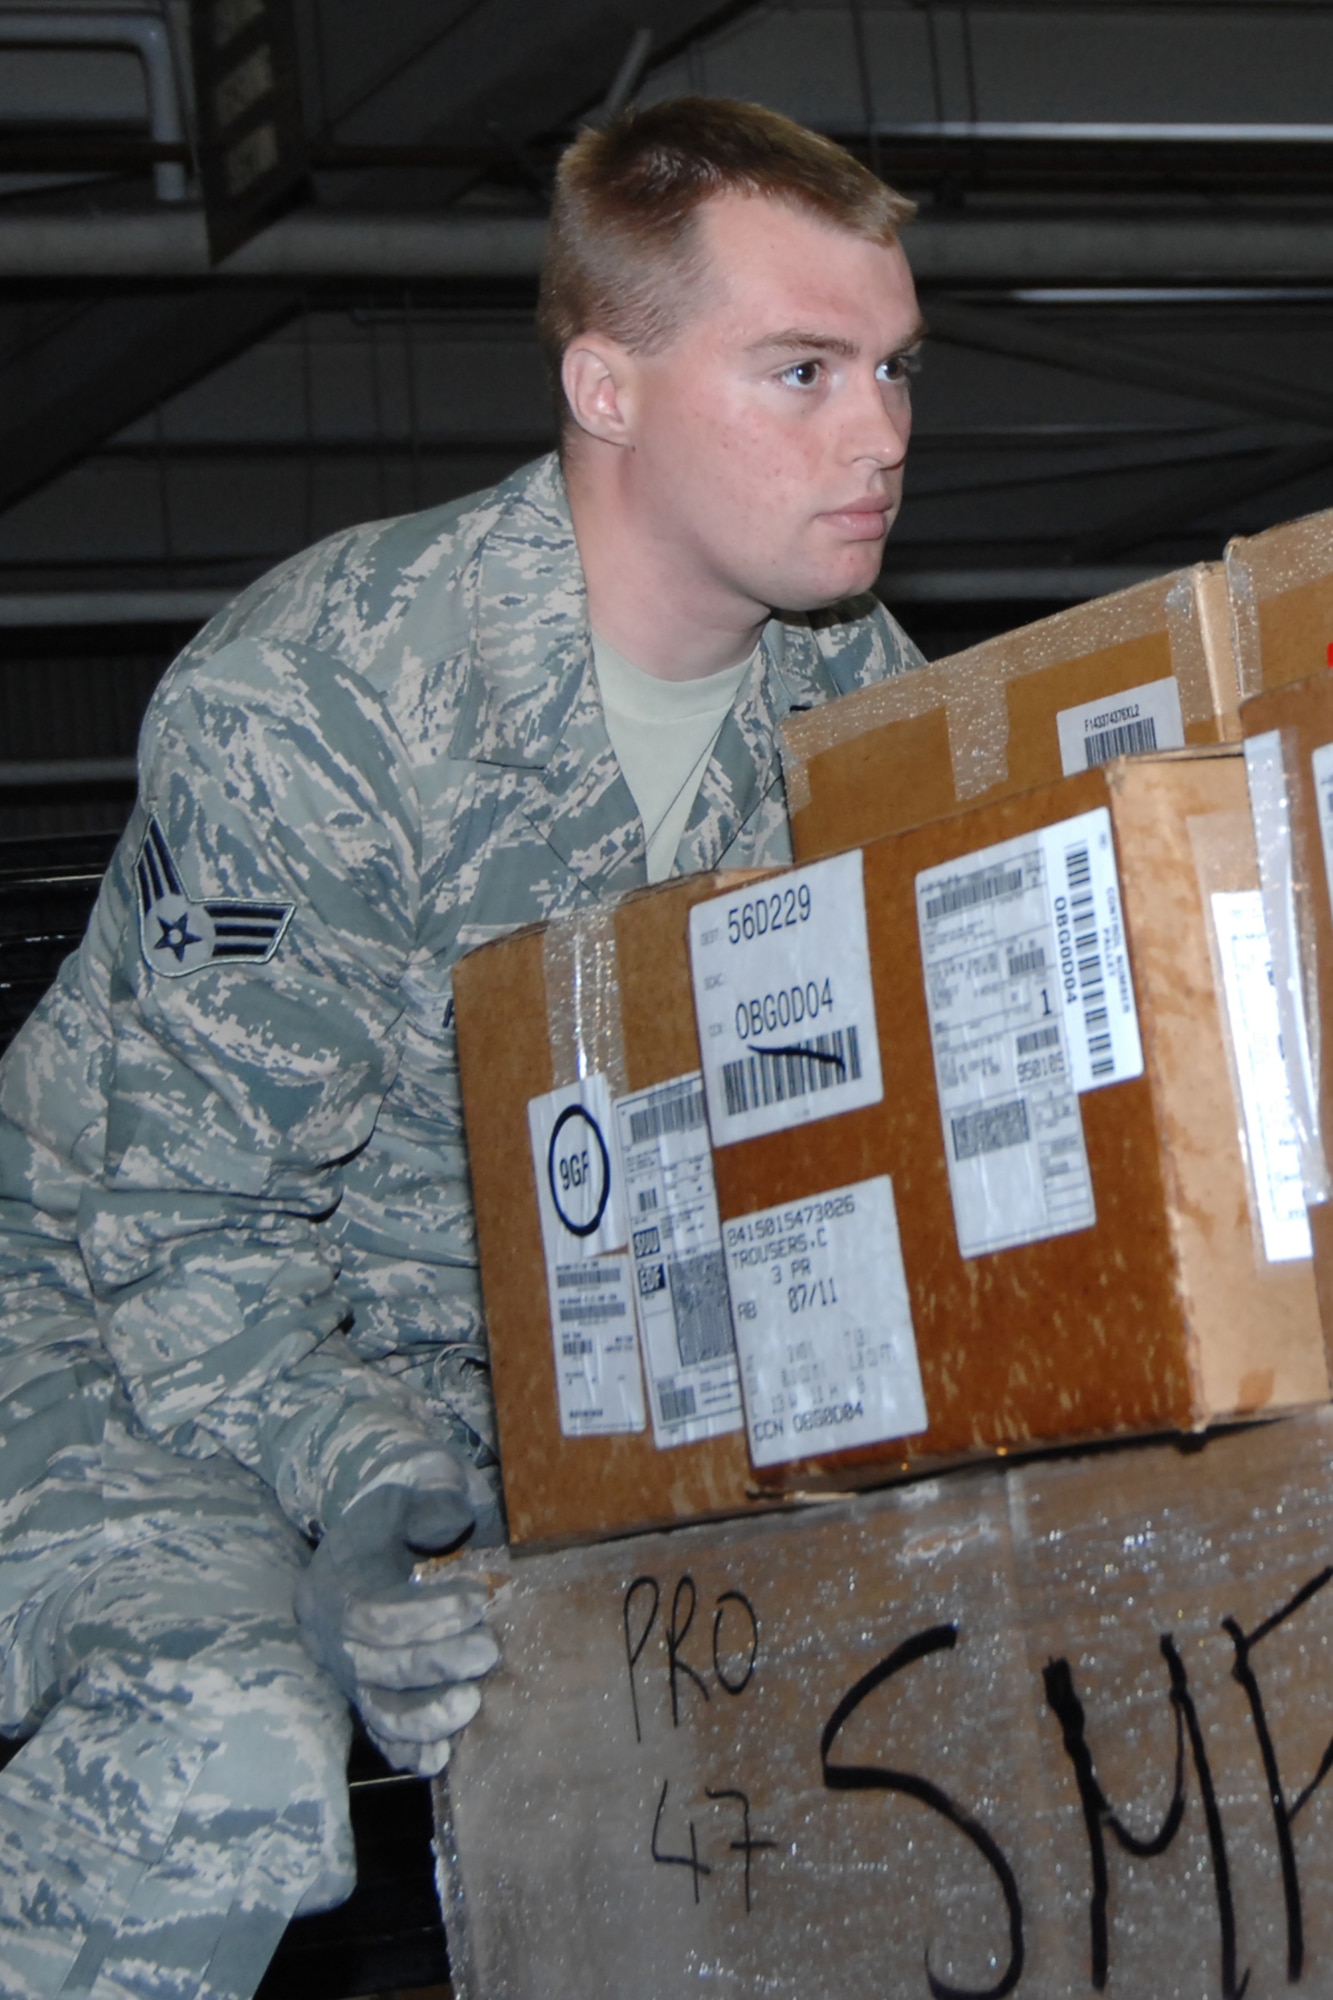 Senior Airman Burke Hyde, a traffic management specialist for the 127th Logistics Readiness Squadron, transfers a paletted shipment for the 673rd Logistics Readiness Squadron of Elmendorf, Alaska. Approximately 40 Airmen from the 127th LRS spent their two weeks of annual training integrated with the active duty and guard personnel of Joint Base Elmendorf/Ft. Richardson (JBER), where they accomplished core task training, and shared knowledge and skills with their counterparts. The 127th LRS is part of the Michigan Air National Guard. (USAF Photo by SSgt. Rachel Barton)